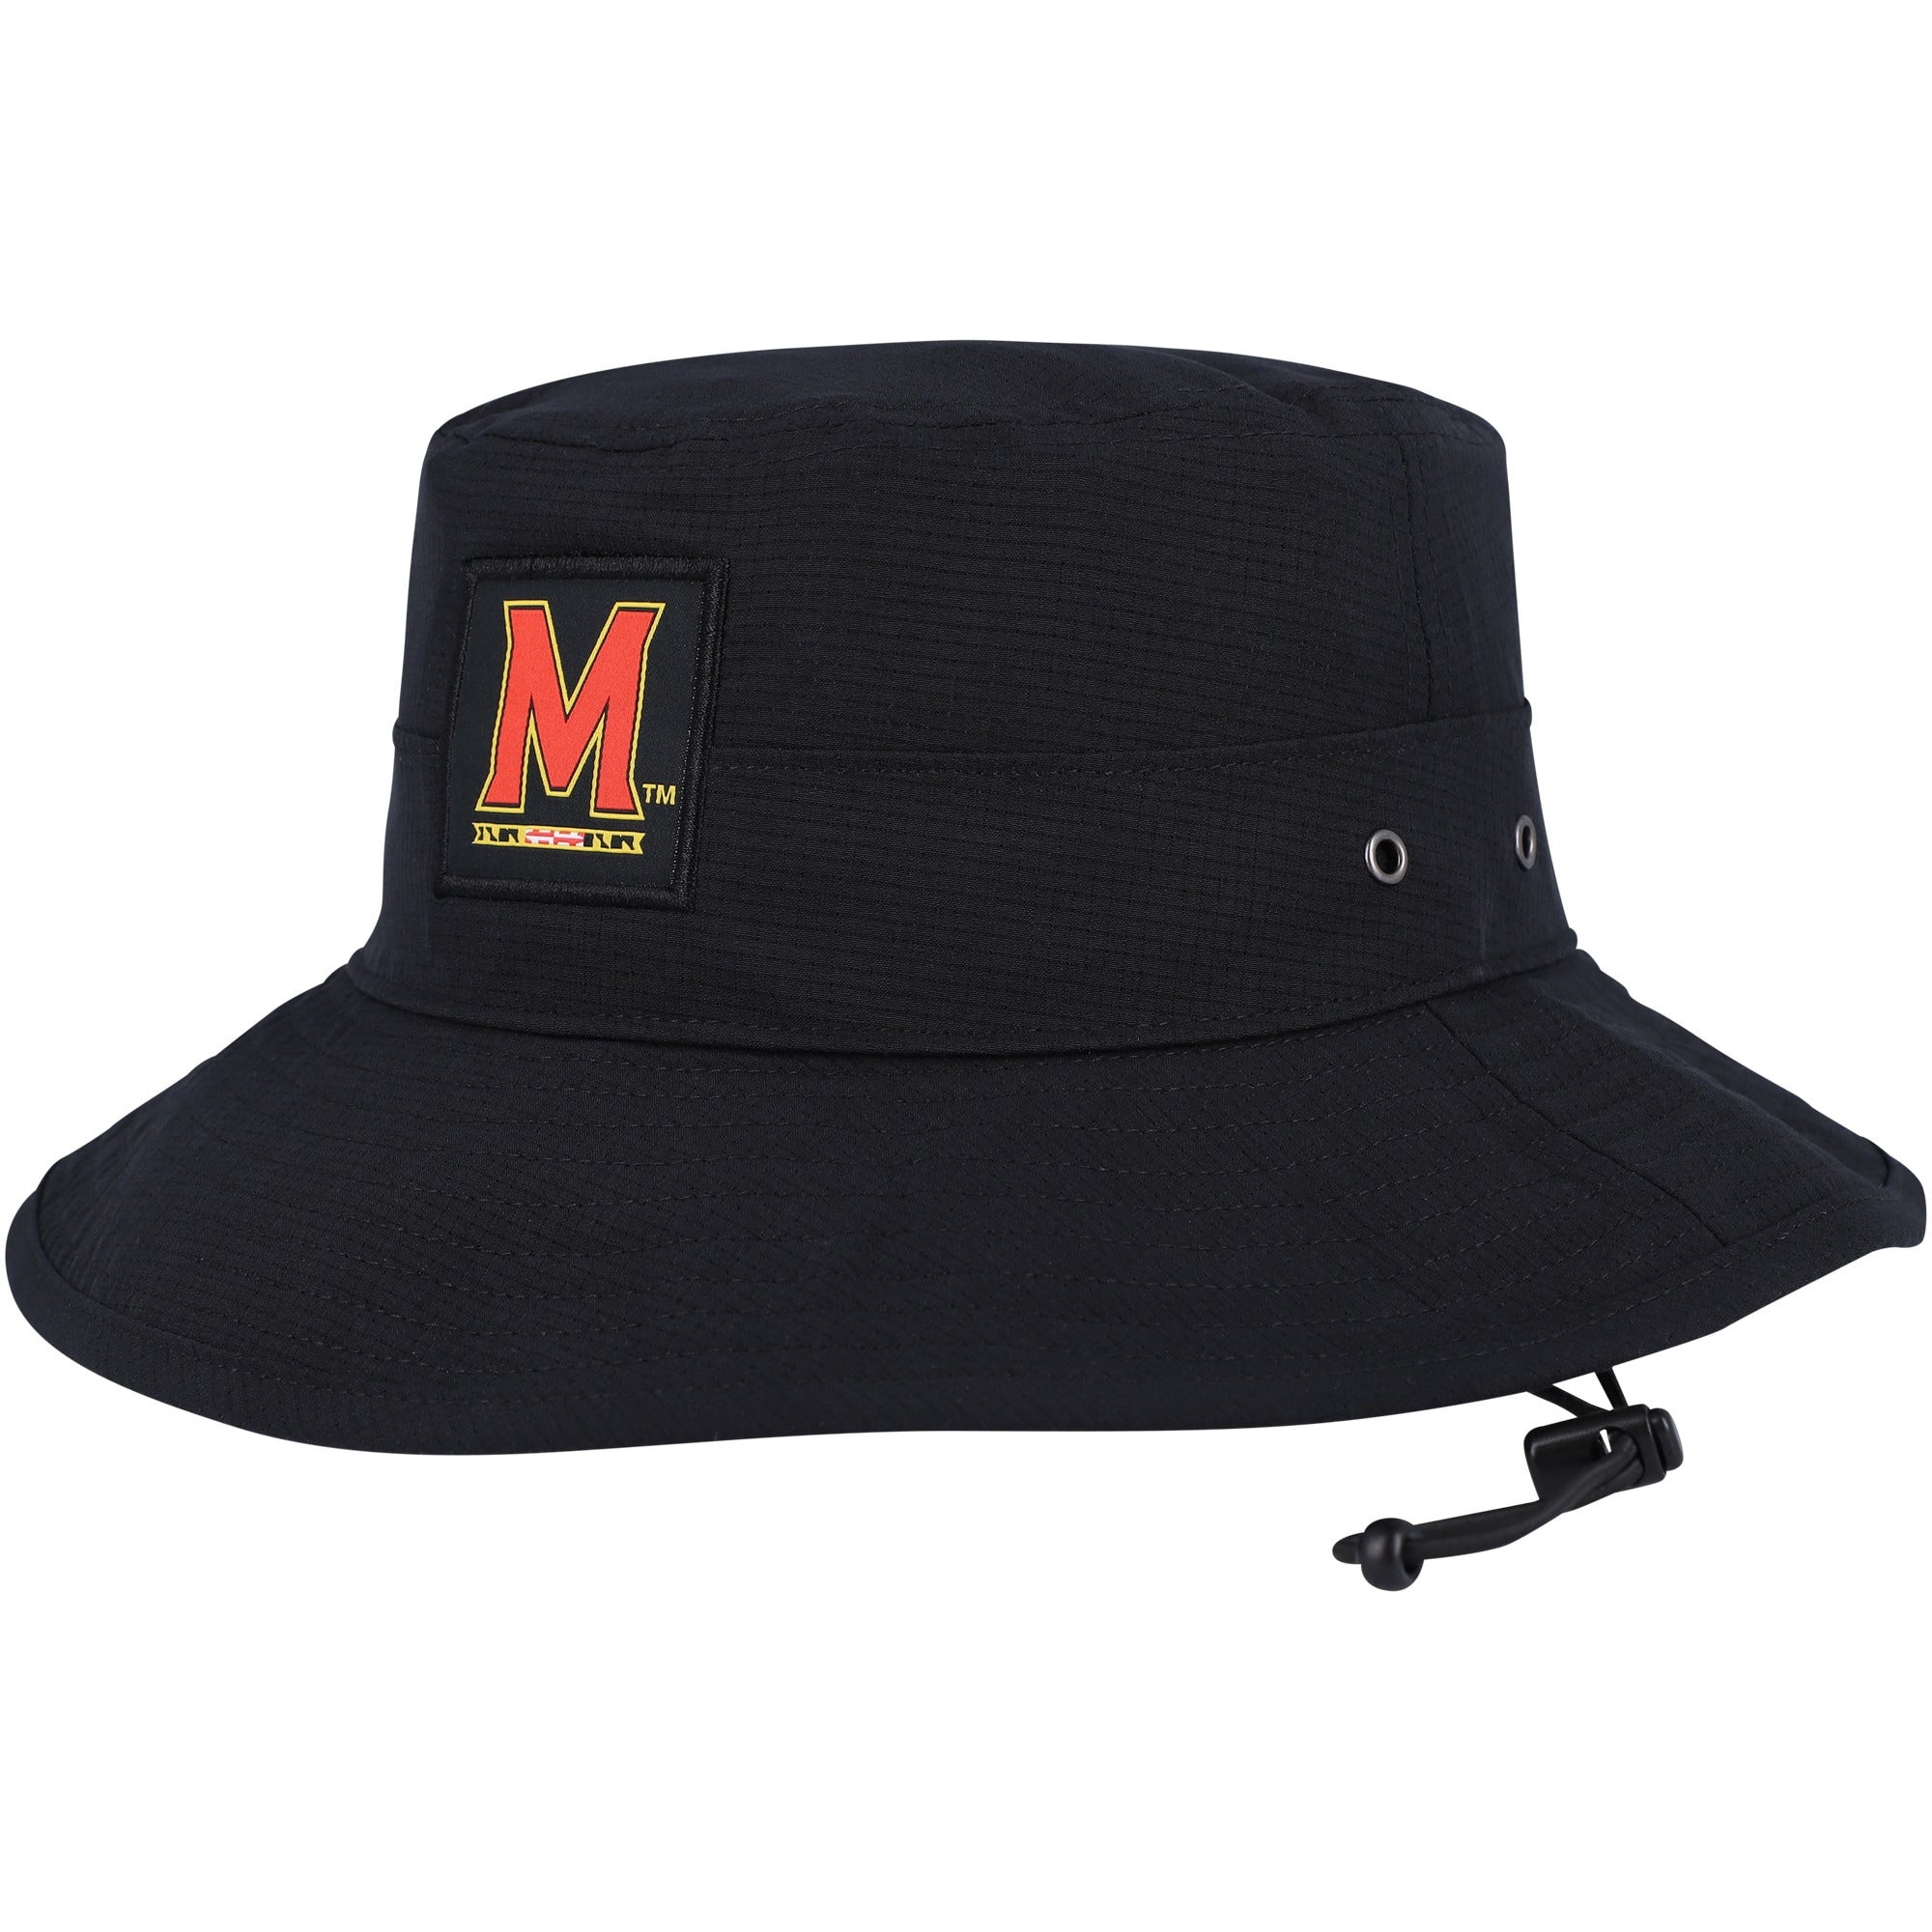 Under Armour Maryland Airvent Boonie Hat | Champs Sports